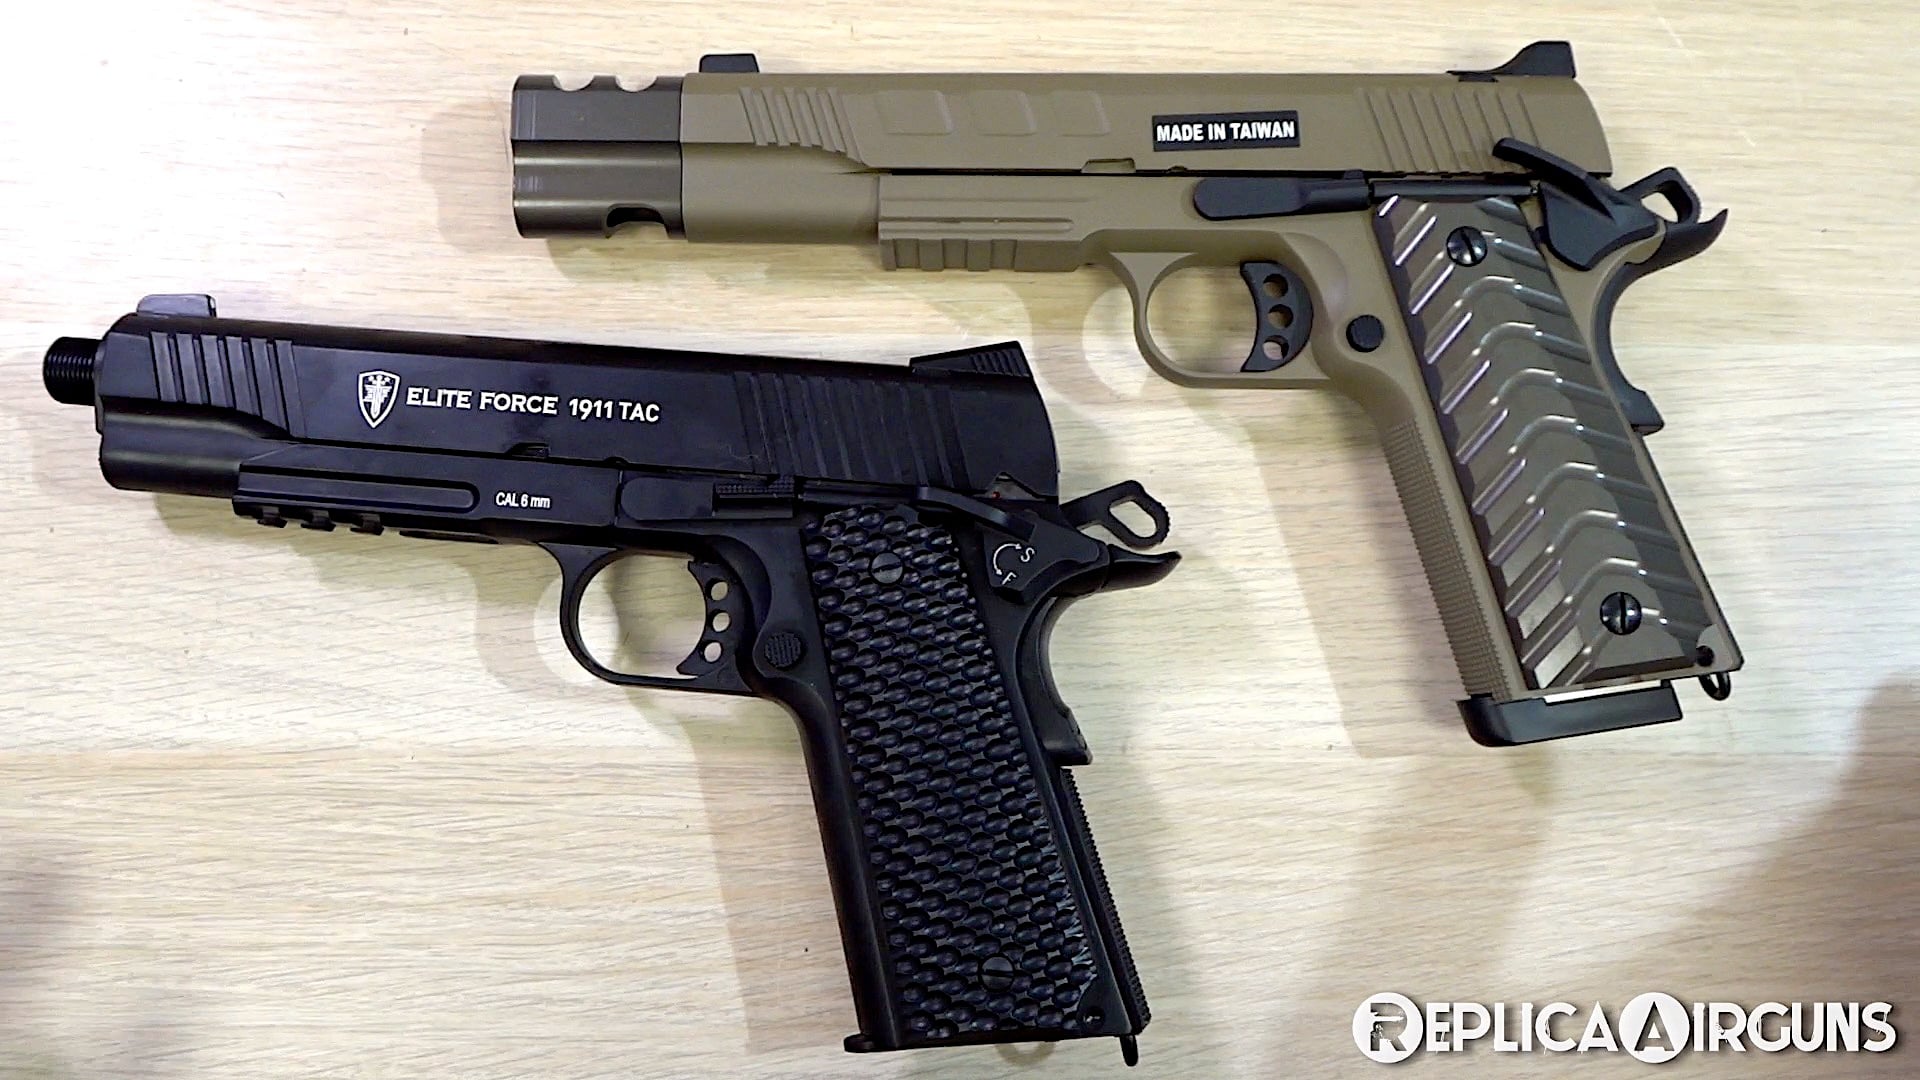 KJWorks KP-16 GBB Airsoft Pistol Table Top Review